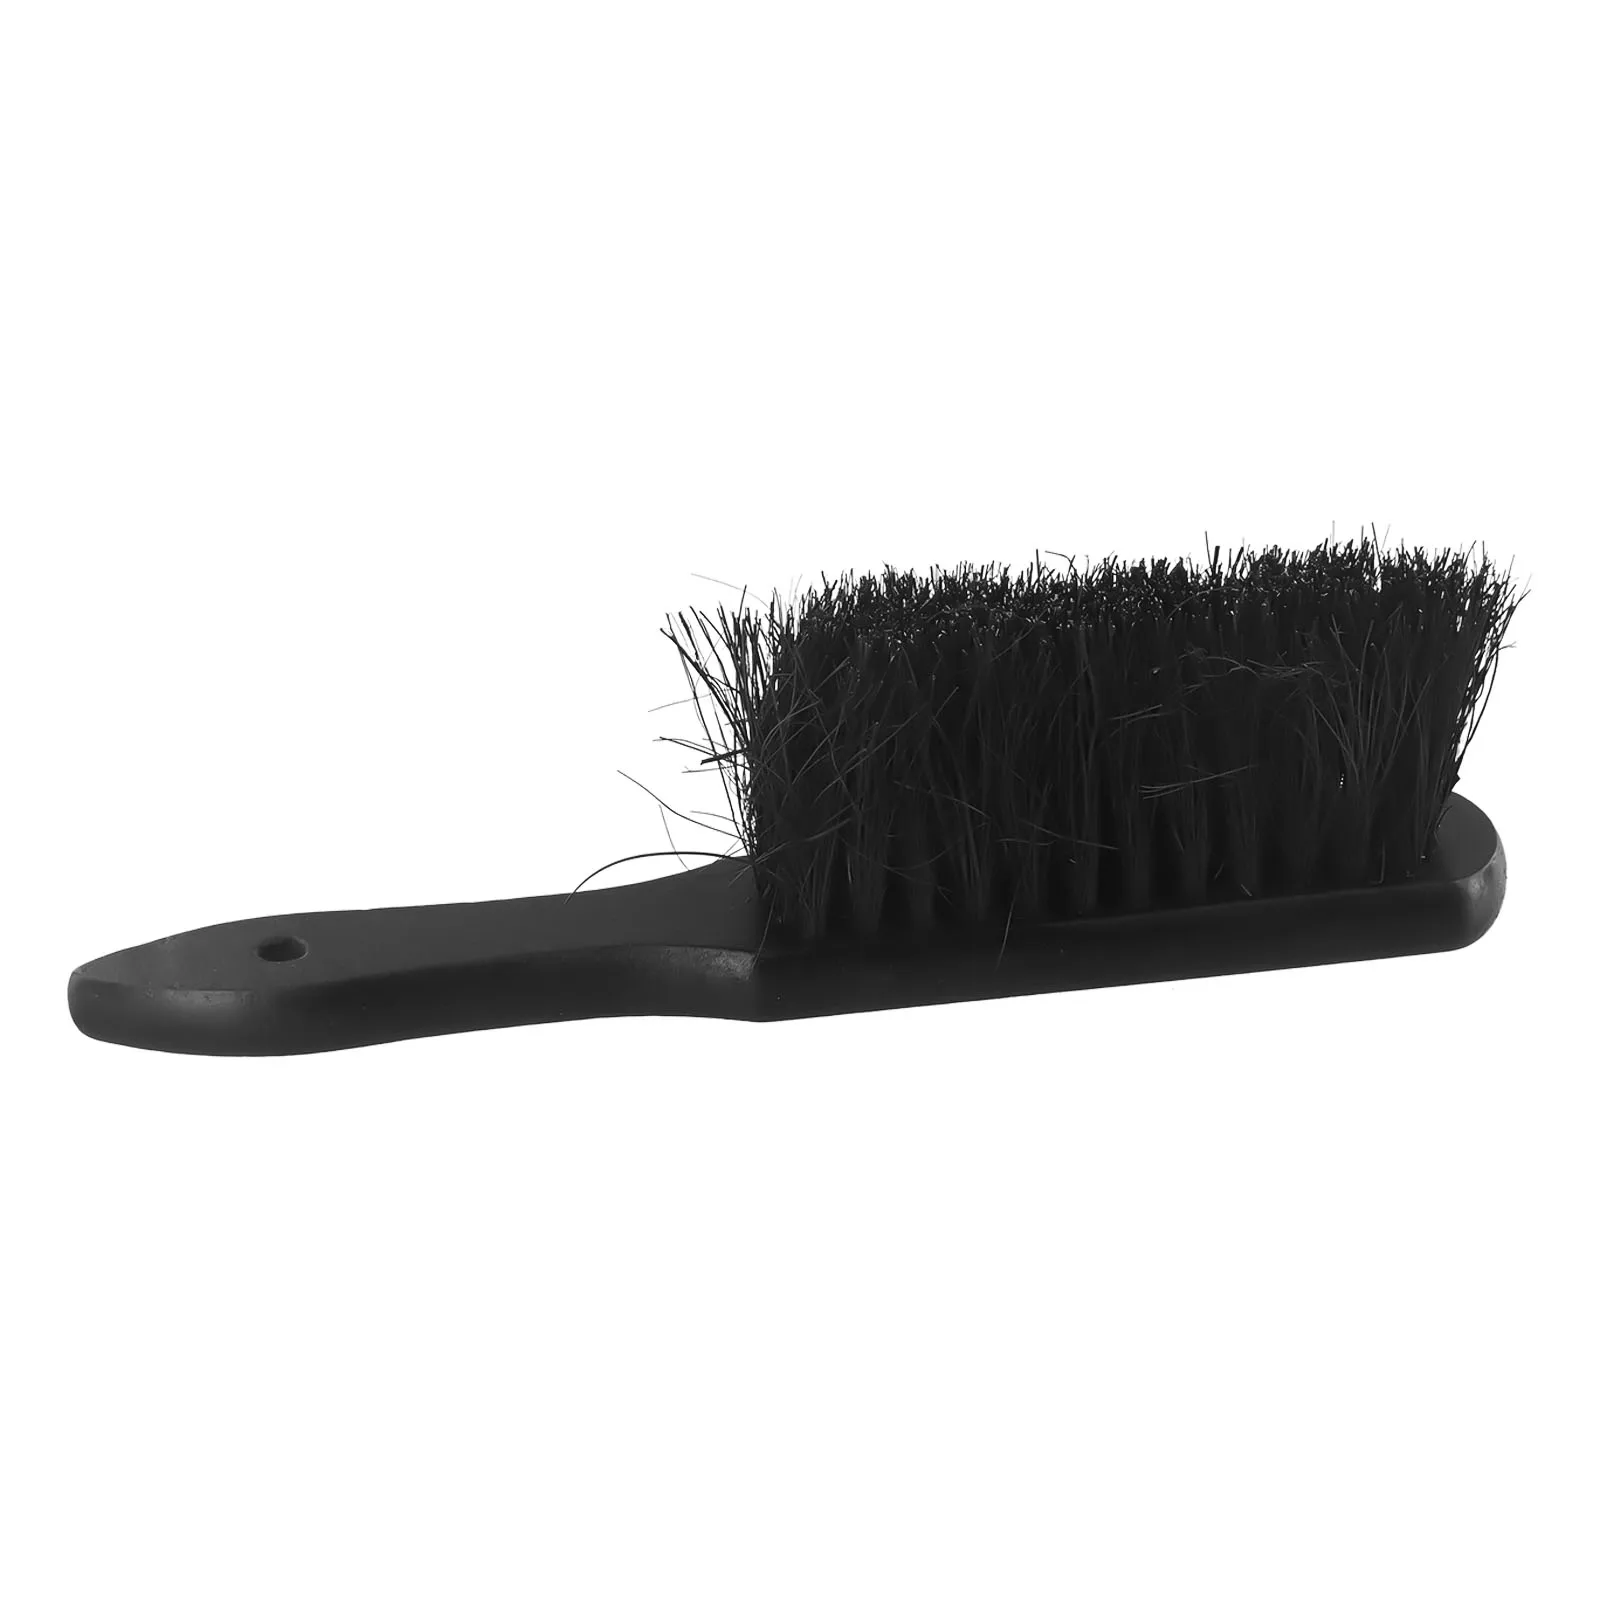 

1Pc Fireplace Brush Wooden Handle Shape Brush Head Fireplace Fire Hearth Fireside Brush For Doing Thorough Cleaning.